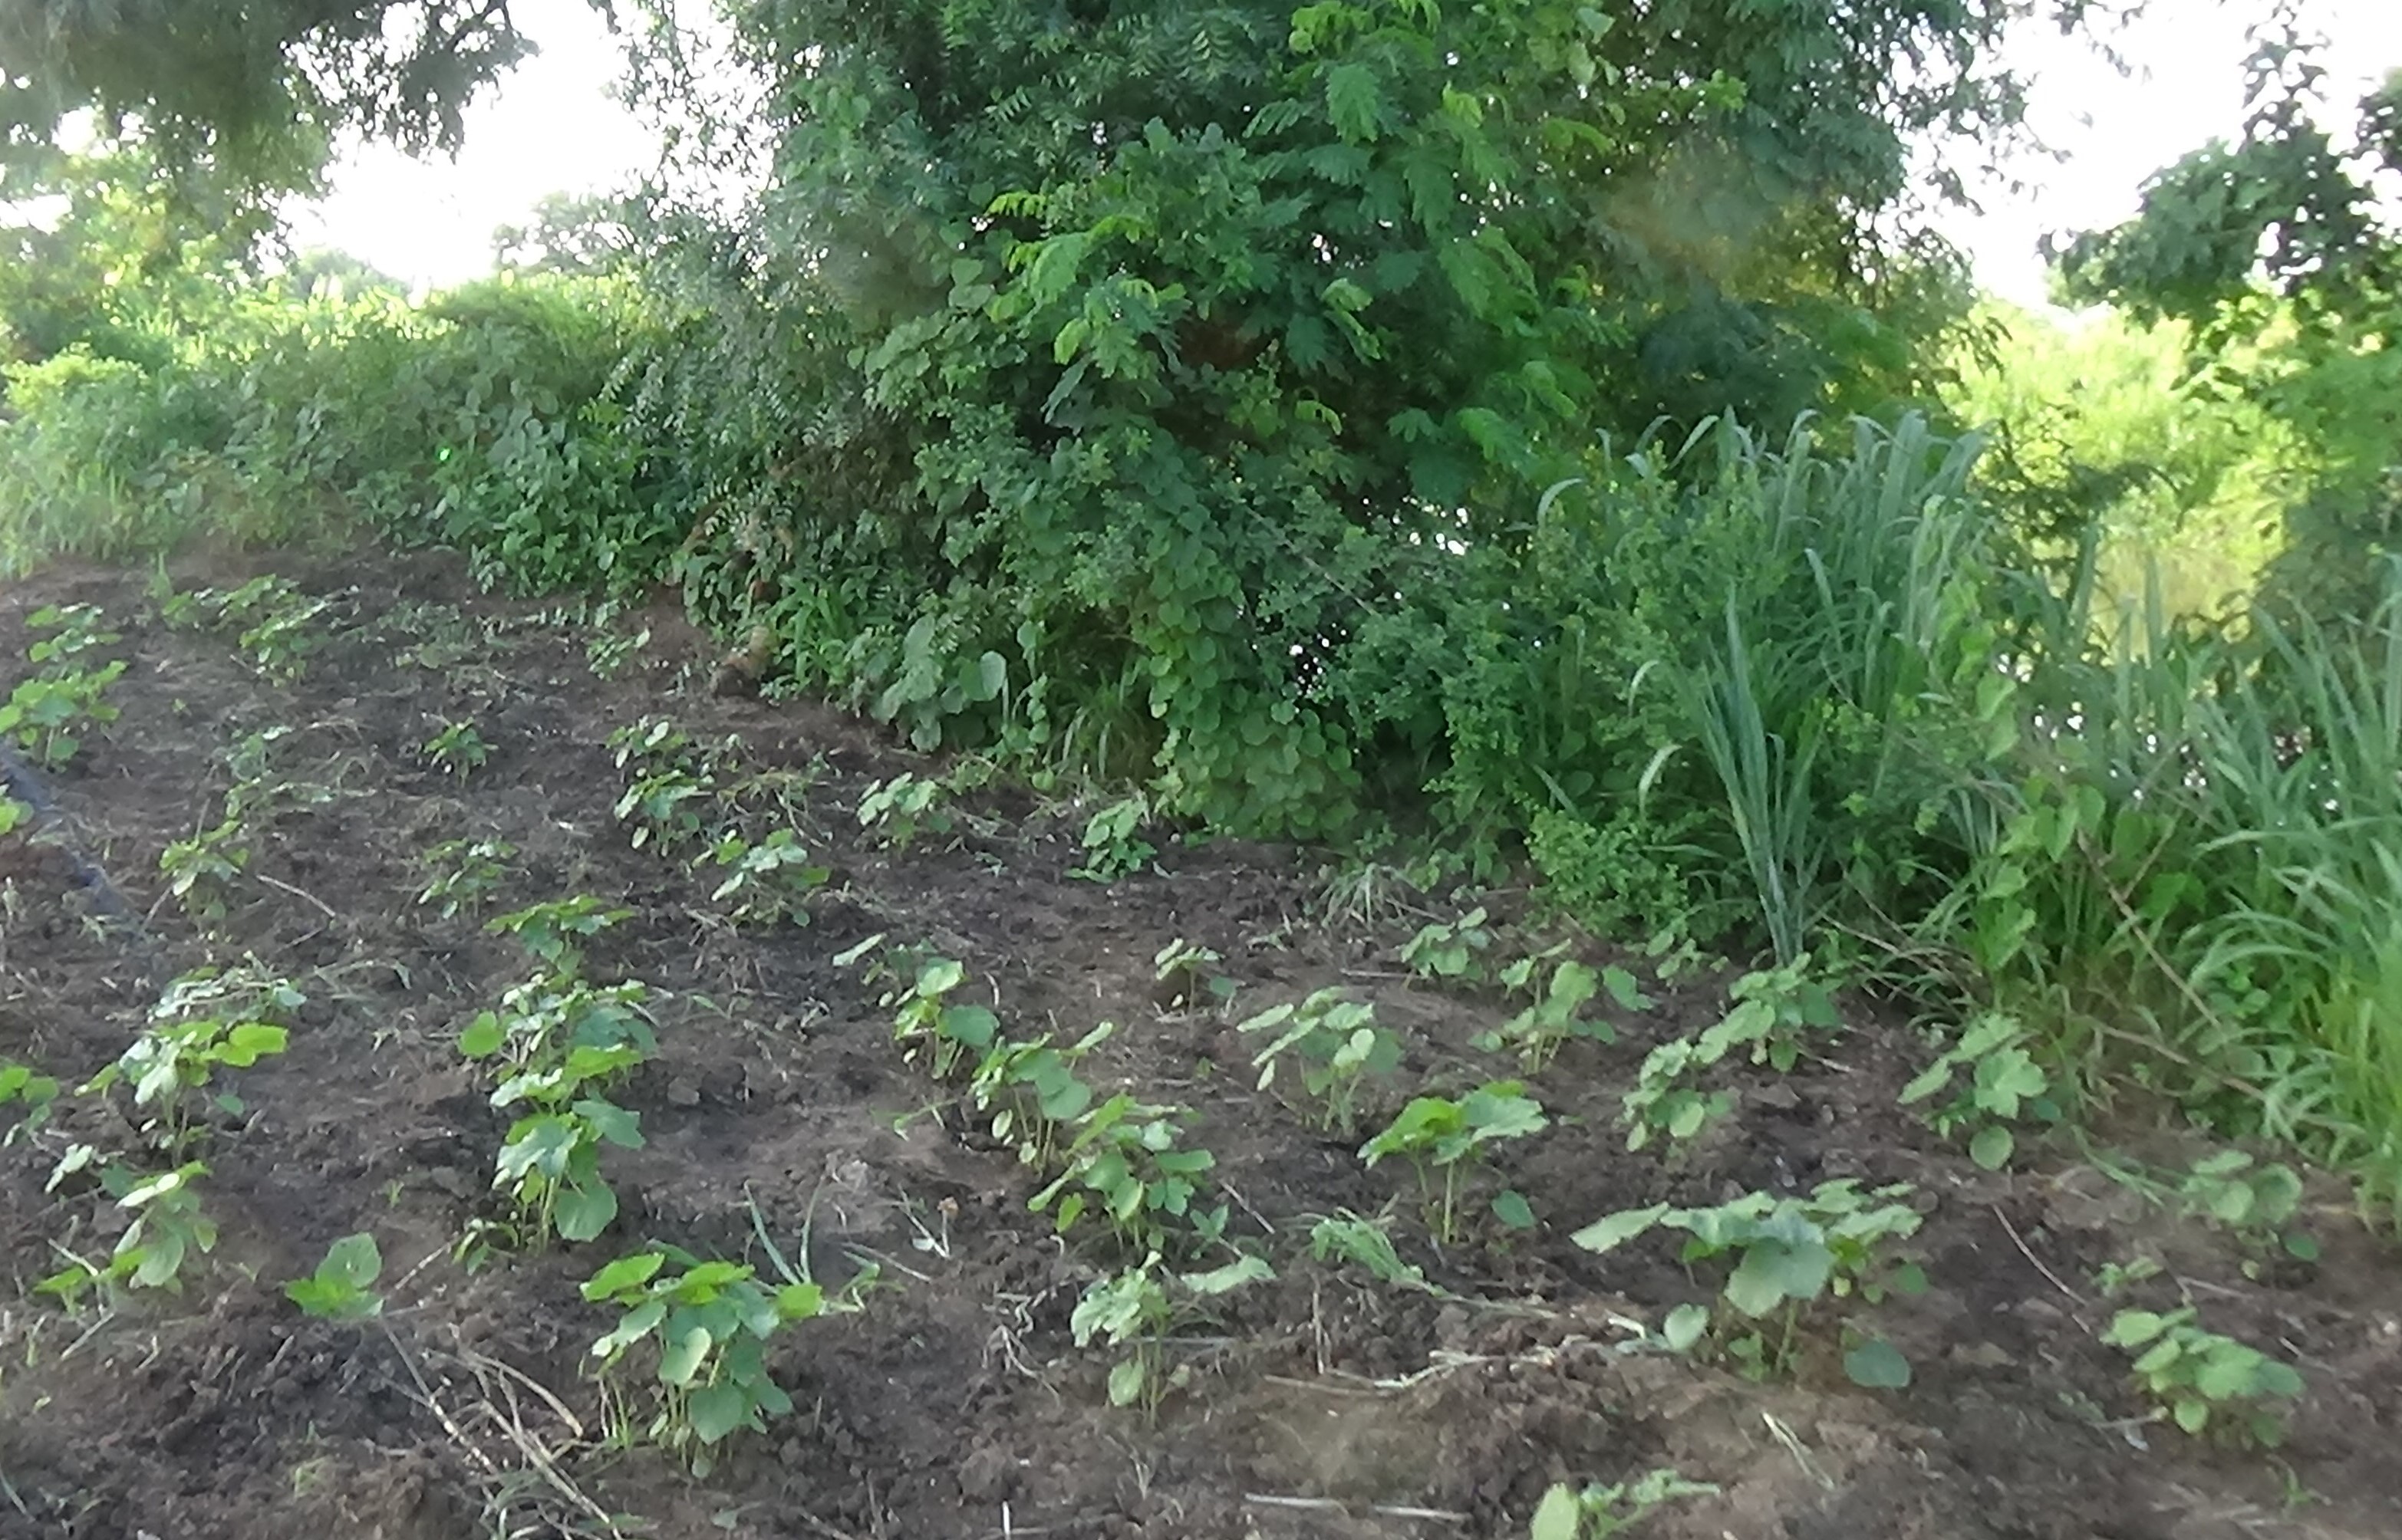 Crops in the demonstration farm bordering the Akobo River.